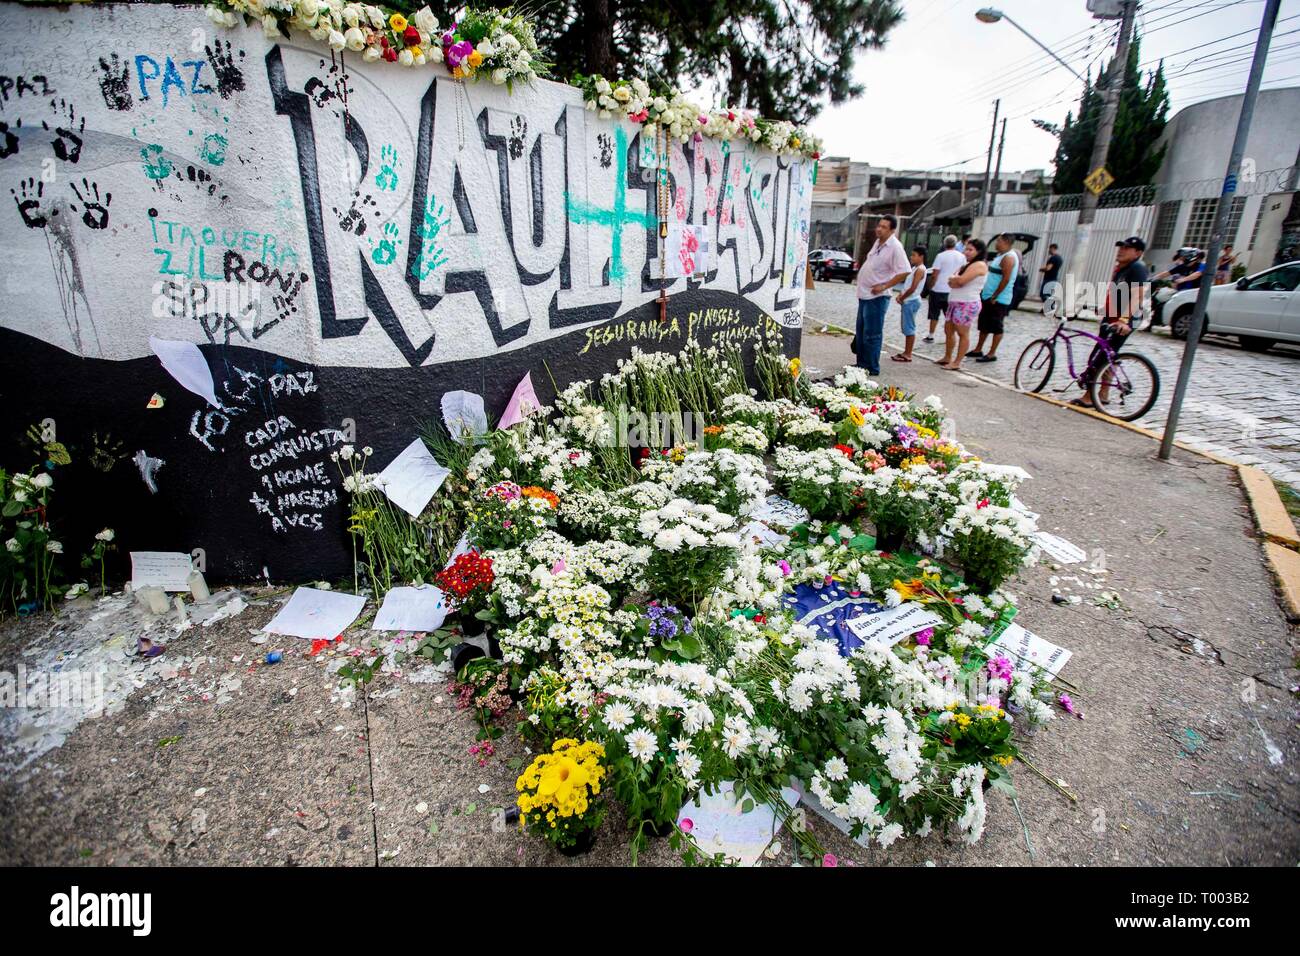 Sao Paulo, Brazil. 16th March 2019. SP - Sao Paulo - 03/16/2019 - Movement State School Raul Brasil - Movement in front of Raul Brasil State School in the city of Suzano region of Sao Paulo, 3 days after the massacre that left 10 dead and several injured. People continue to pay homage to the victims, with prayers, flowers or the handprints of Maoes printed with colored paint on the school wall, which has become a symbol of solidarity throughout the days. Credit: AGIF/Alamy Live News Stock Photo